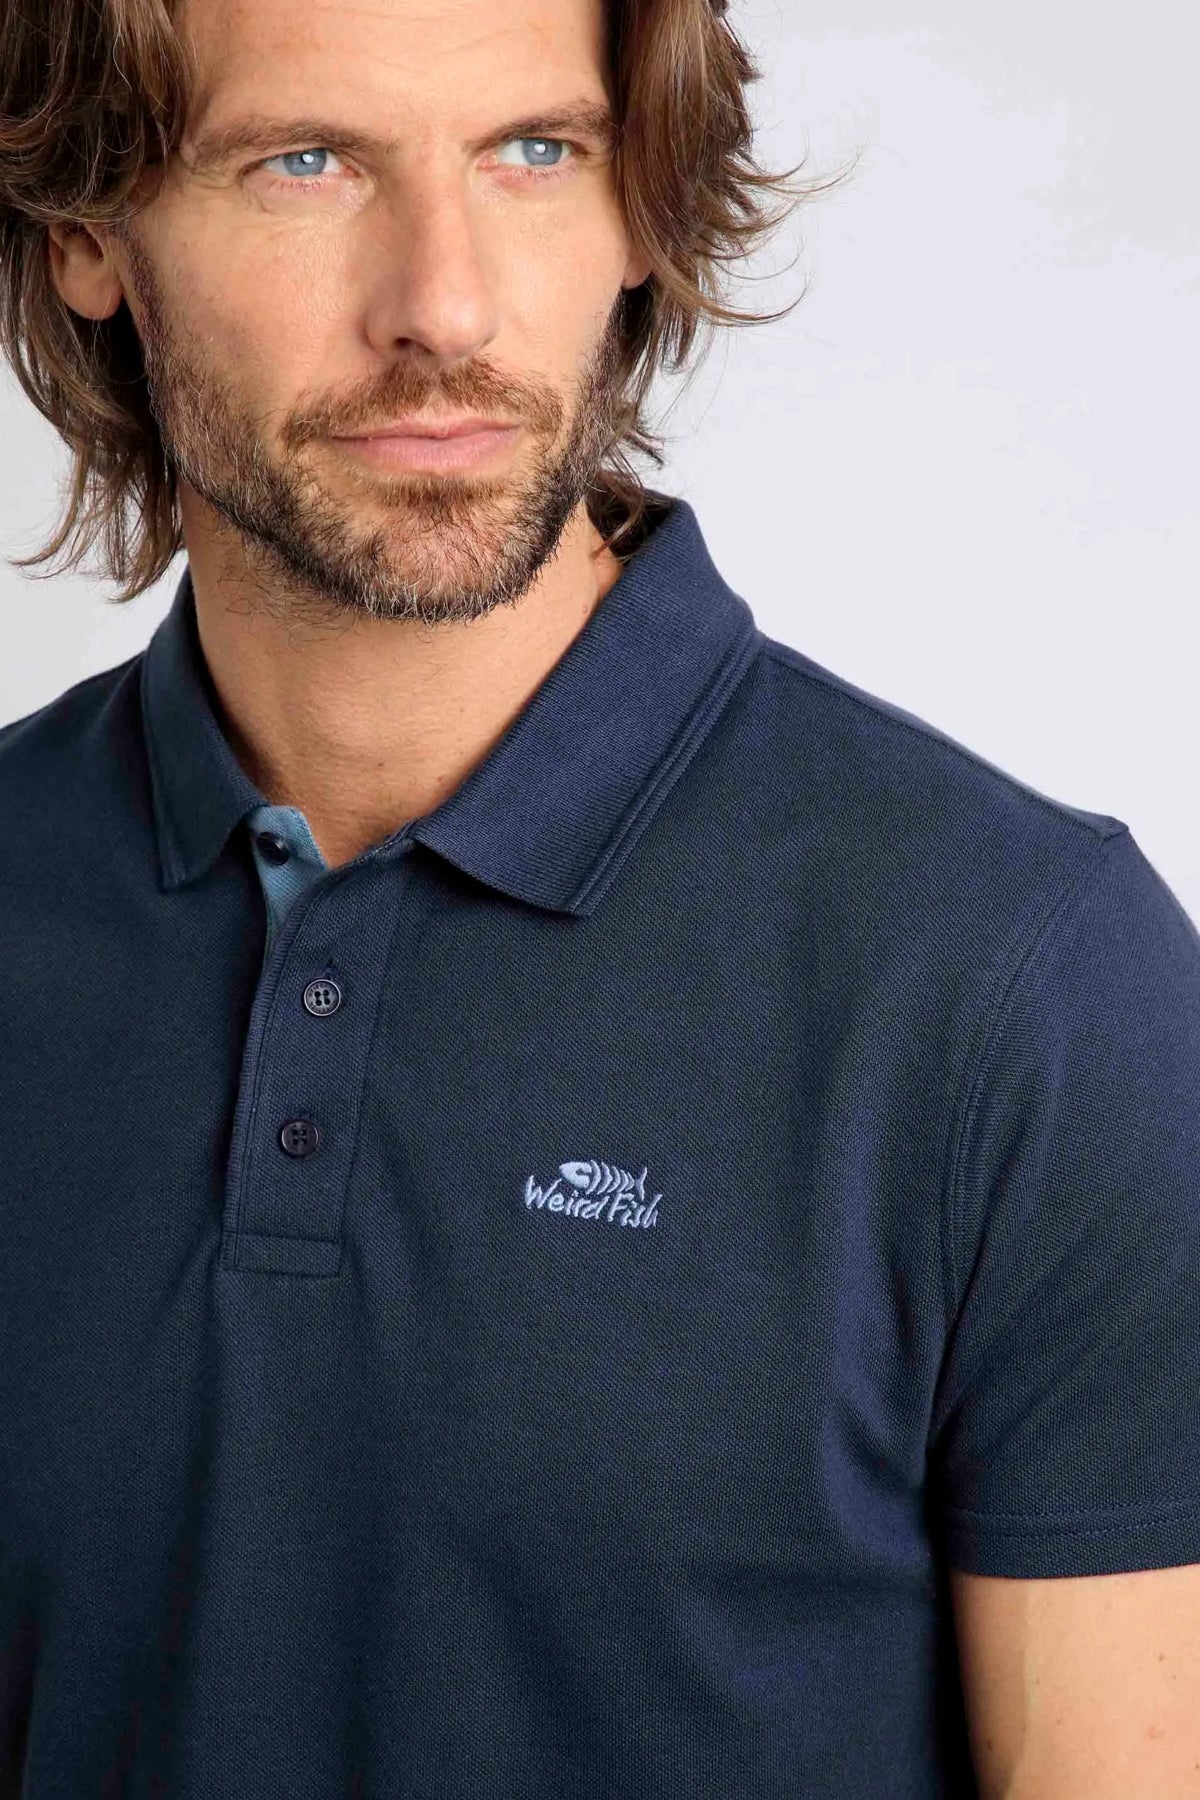 Weird Fish men's Miles pique polo shirt in Navy with small chest logo emblem.